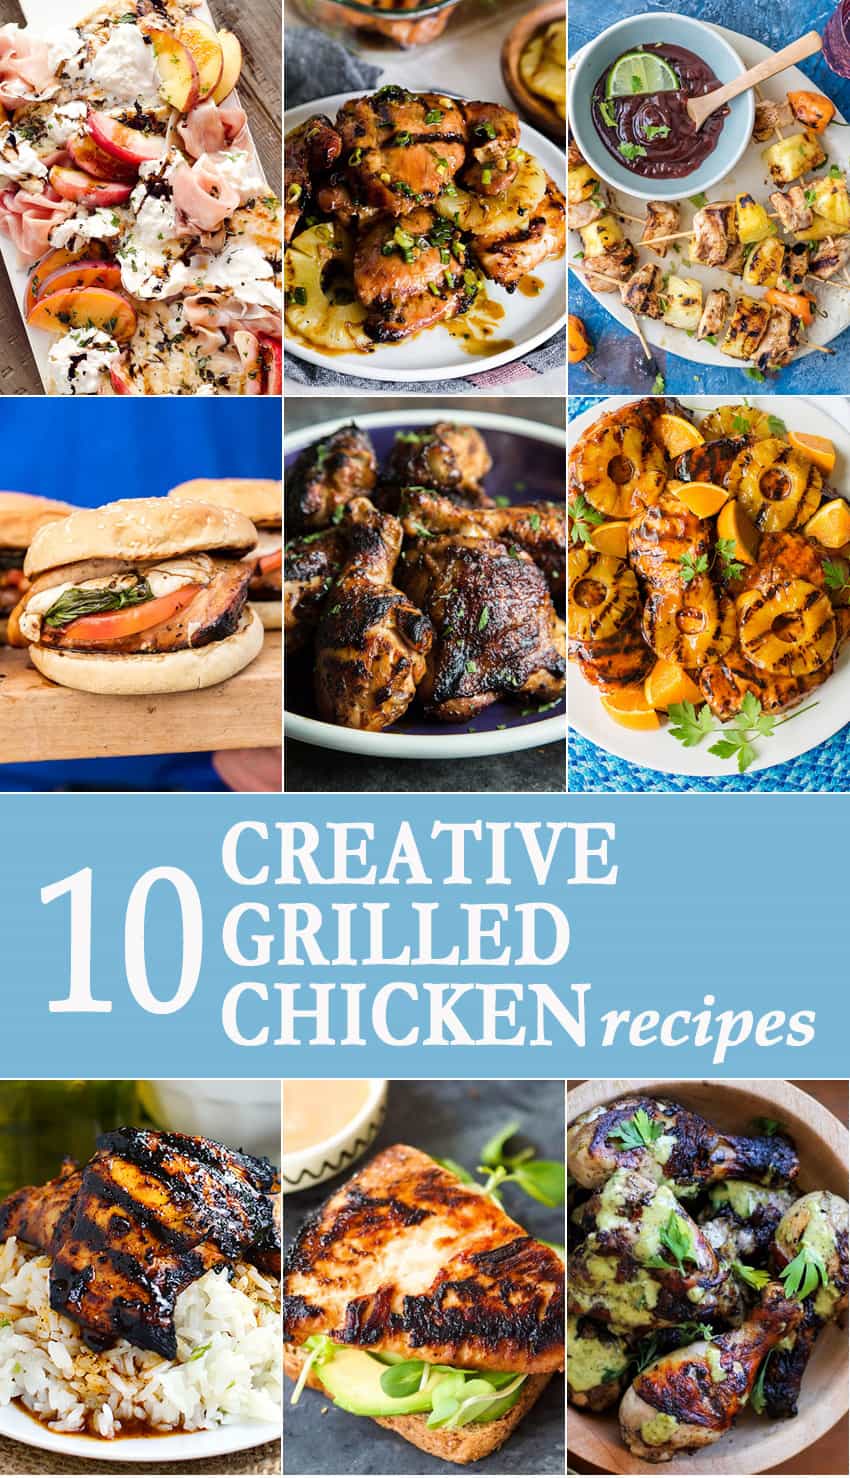 10 Grilled Chicken Recipes (BEST EVER) - The Cookie Rookie®